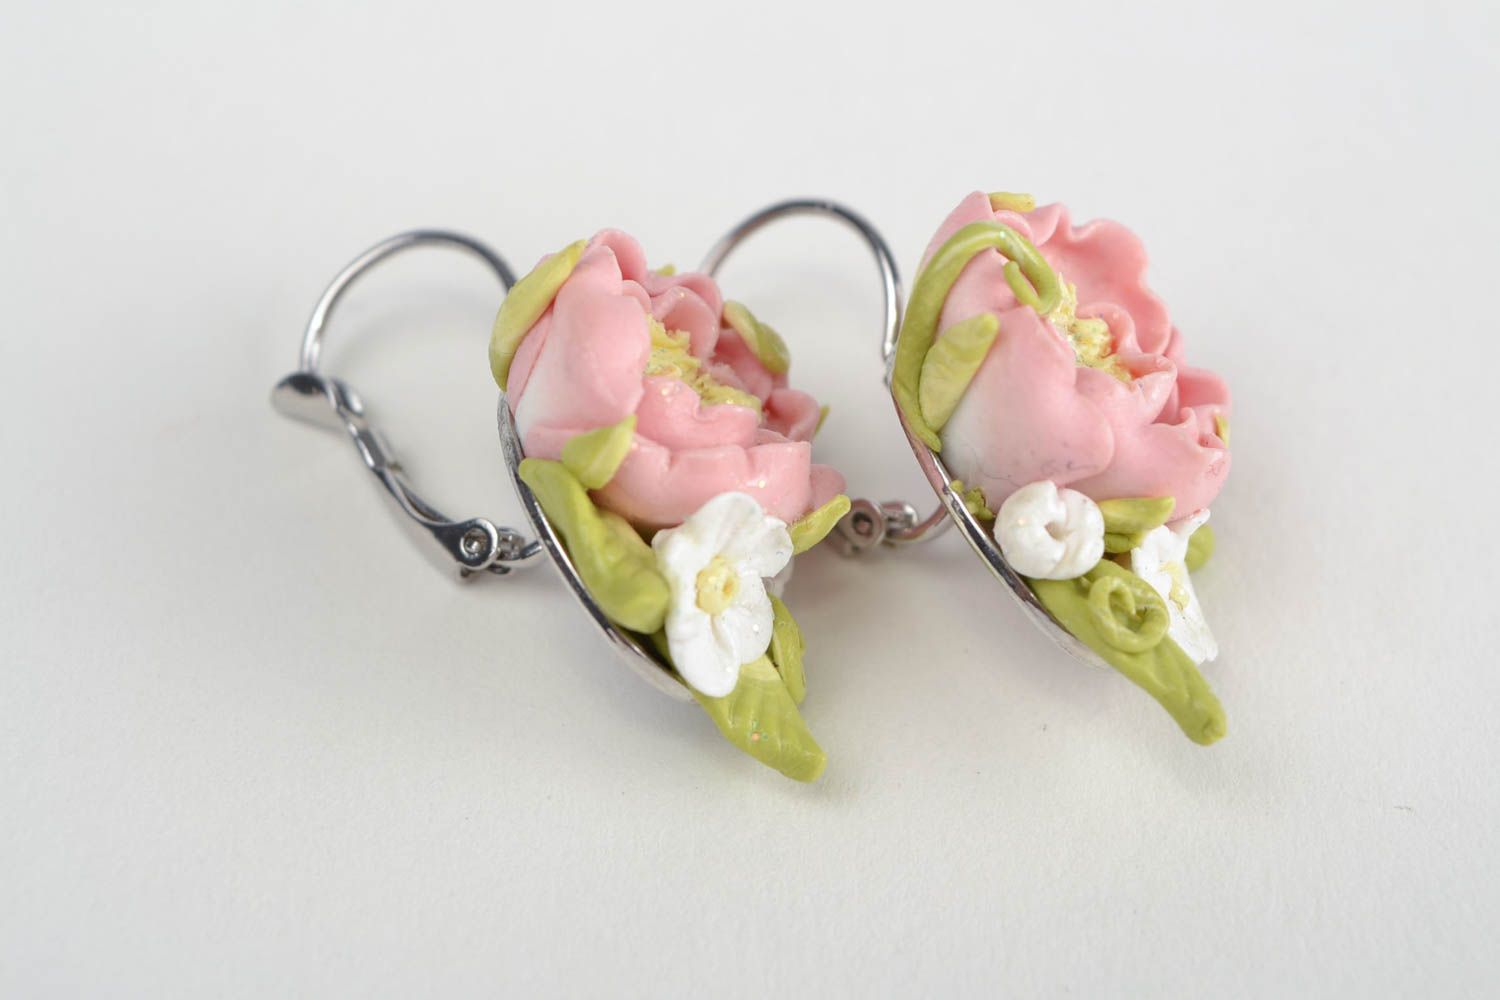 Handmade designer polymer clay pink floral earrings with metal English ear wires photo 4